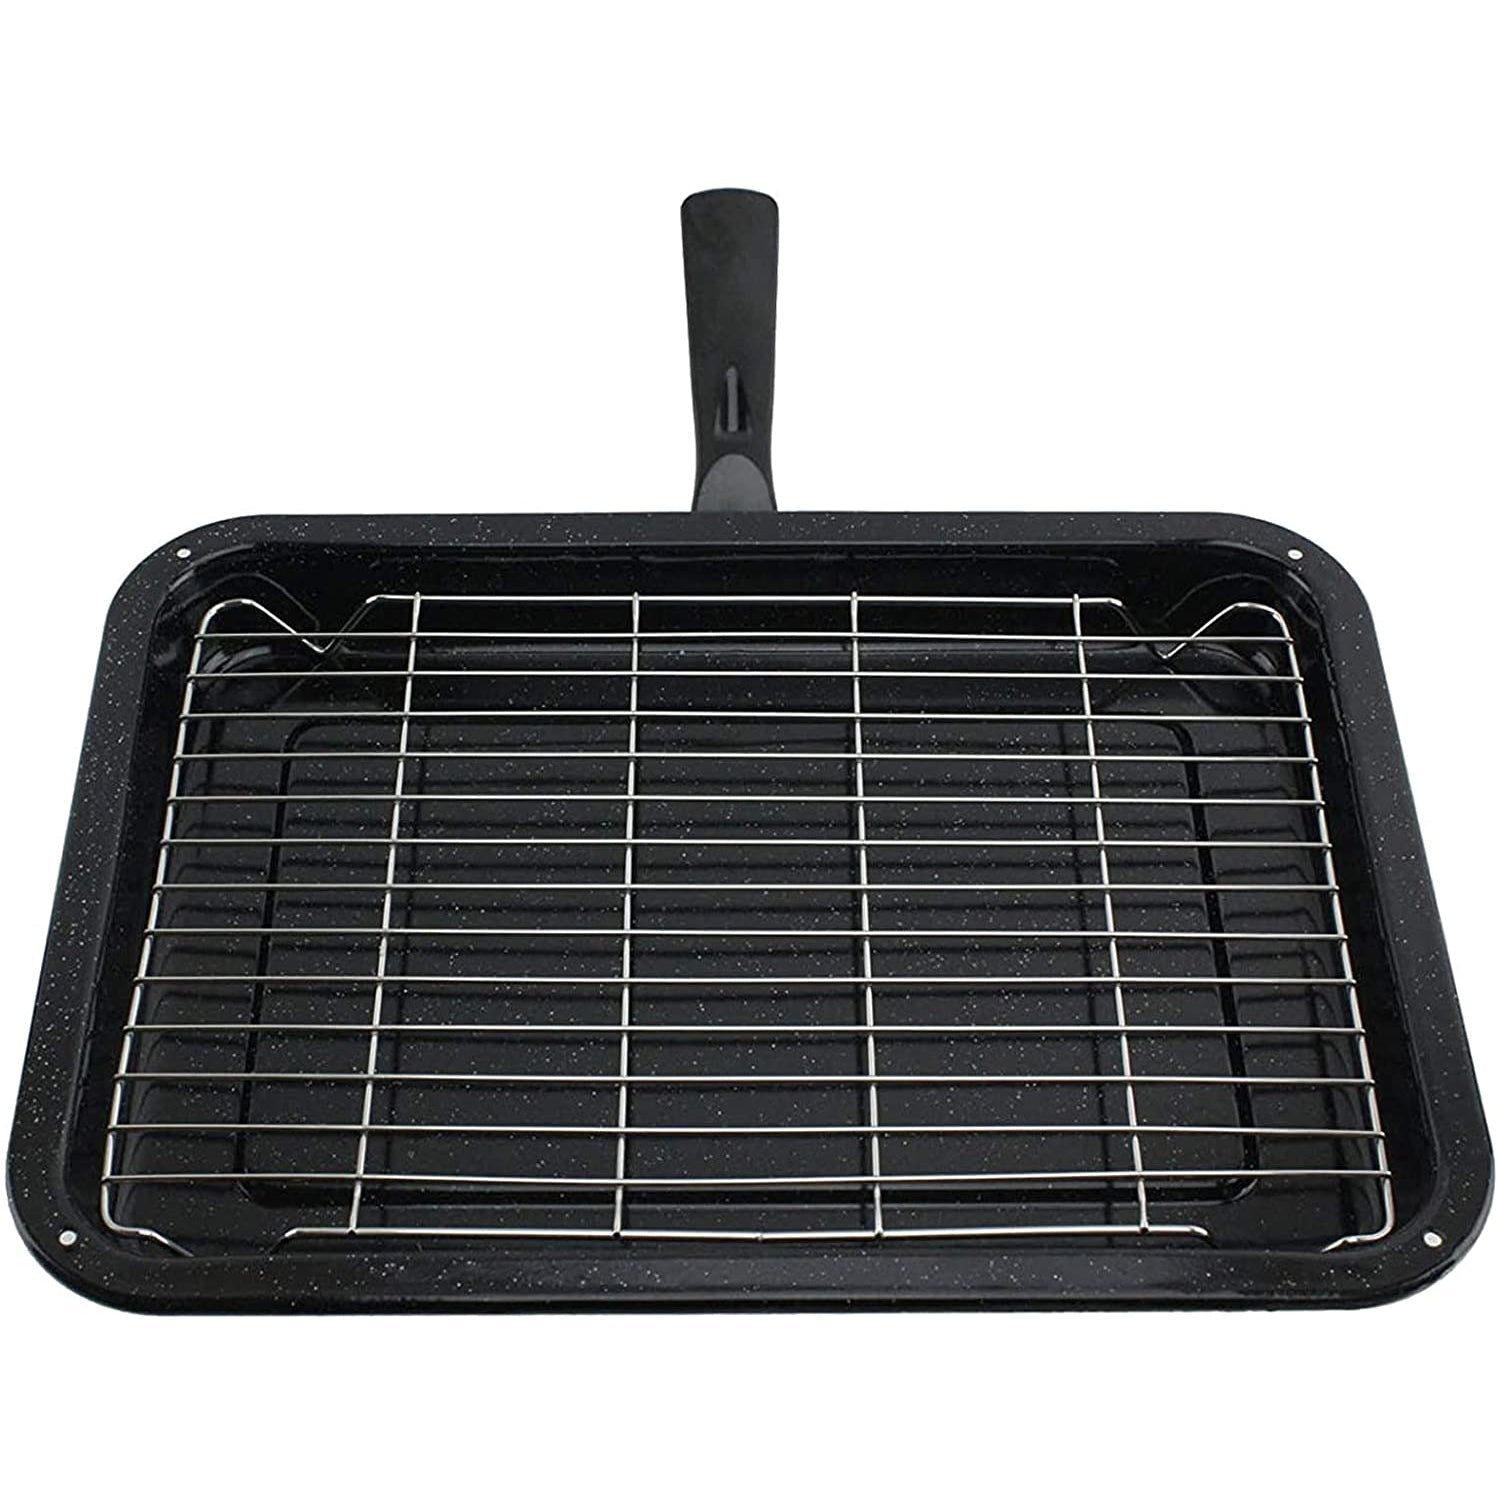 Small Grill Pan with Rack and Detachable Handle + Adjustable Grill Shelf for SWAN Oven Cooker